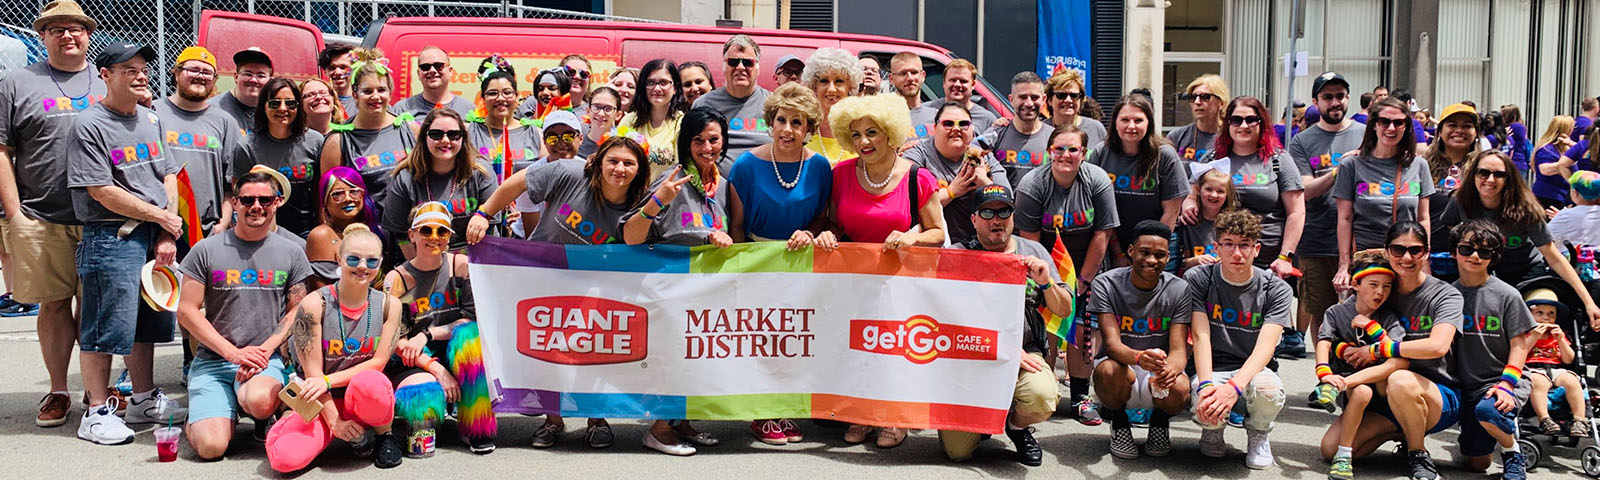 Giant Eagle Named One of the Best Places to Work for LGBTQ Equality